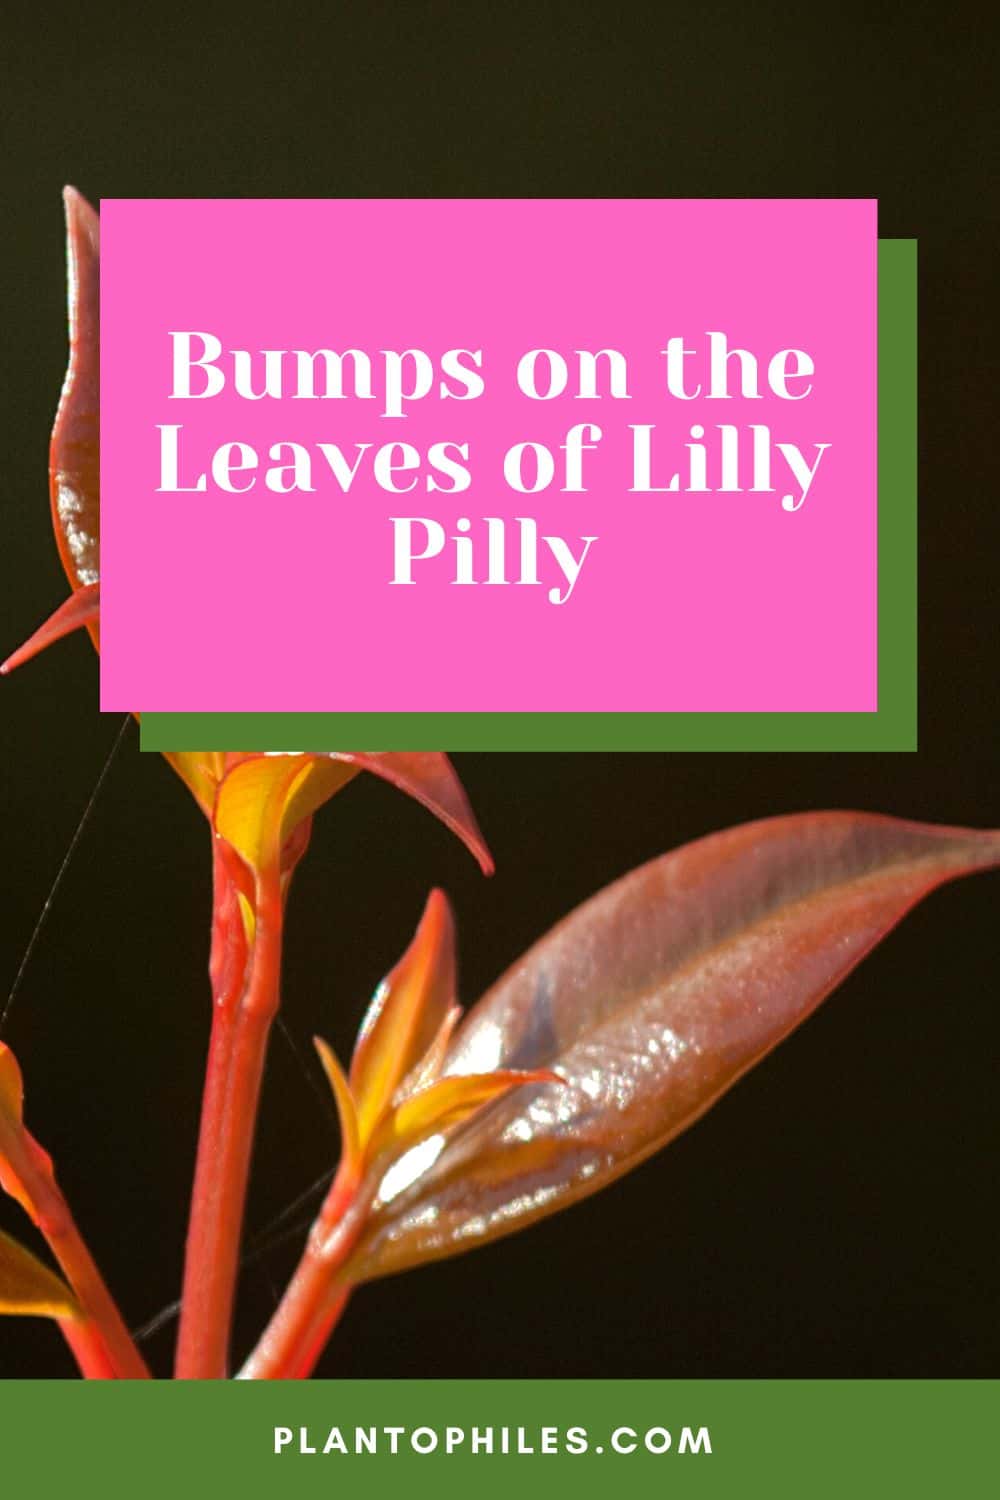 Bumps on the Leaves of Lilly Pilly